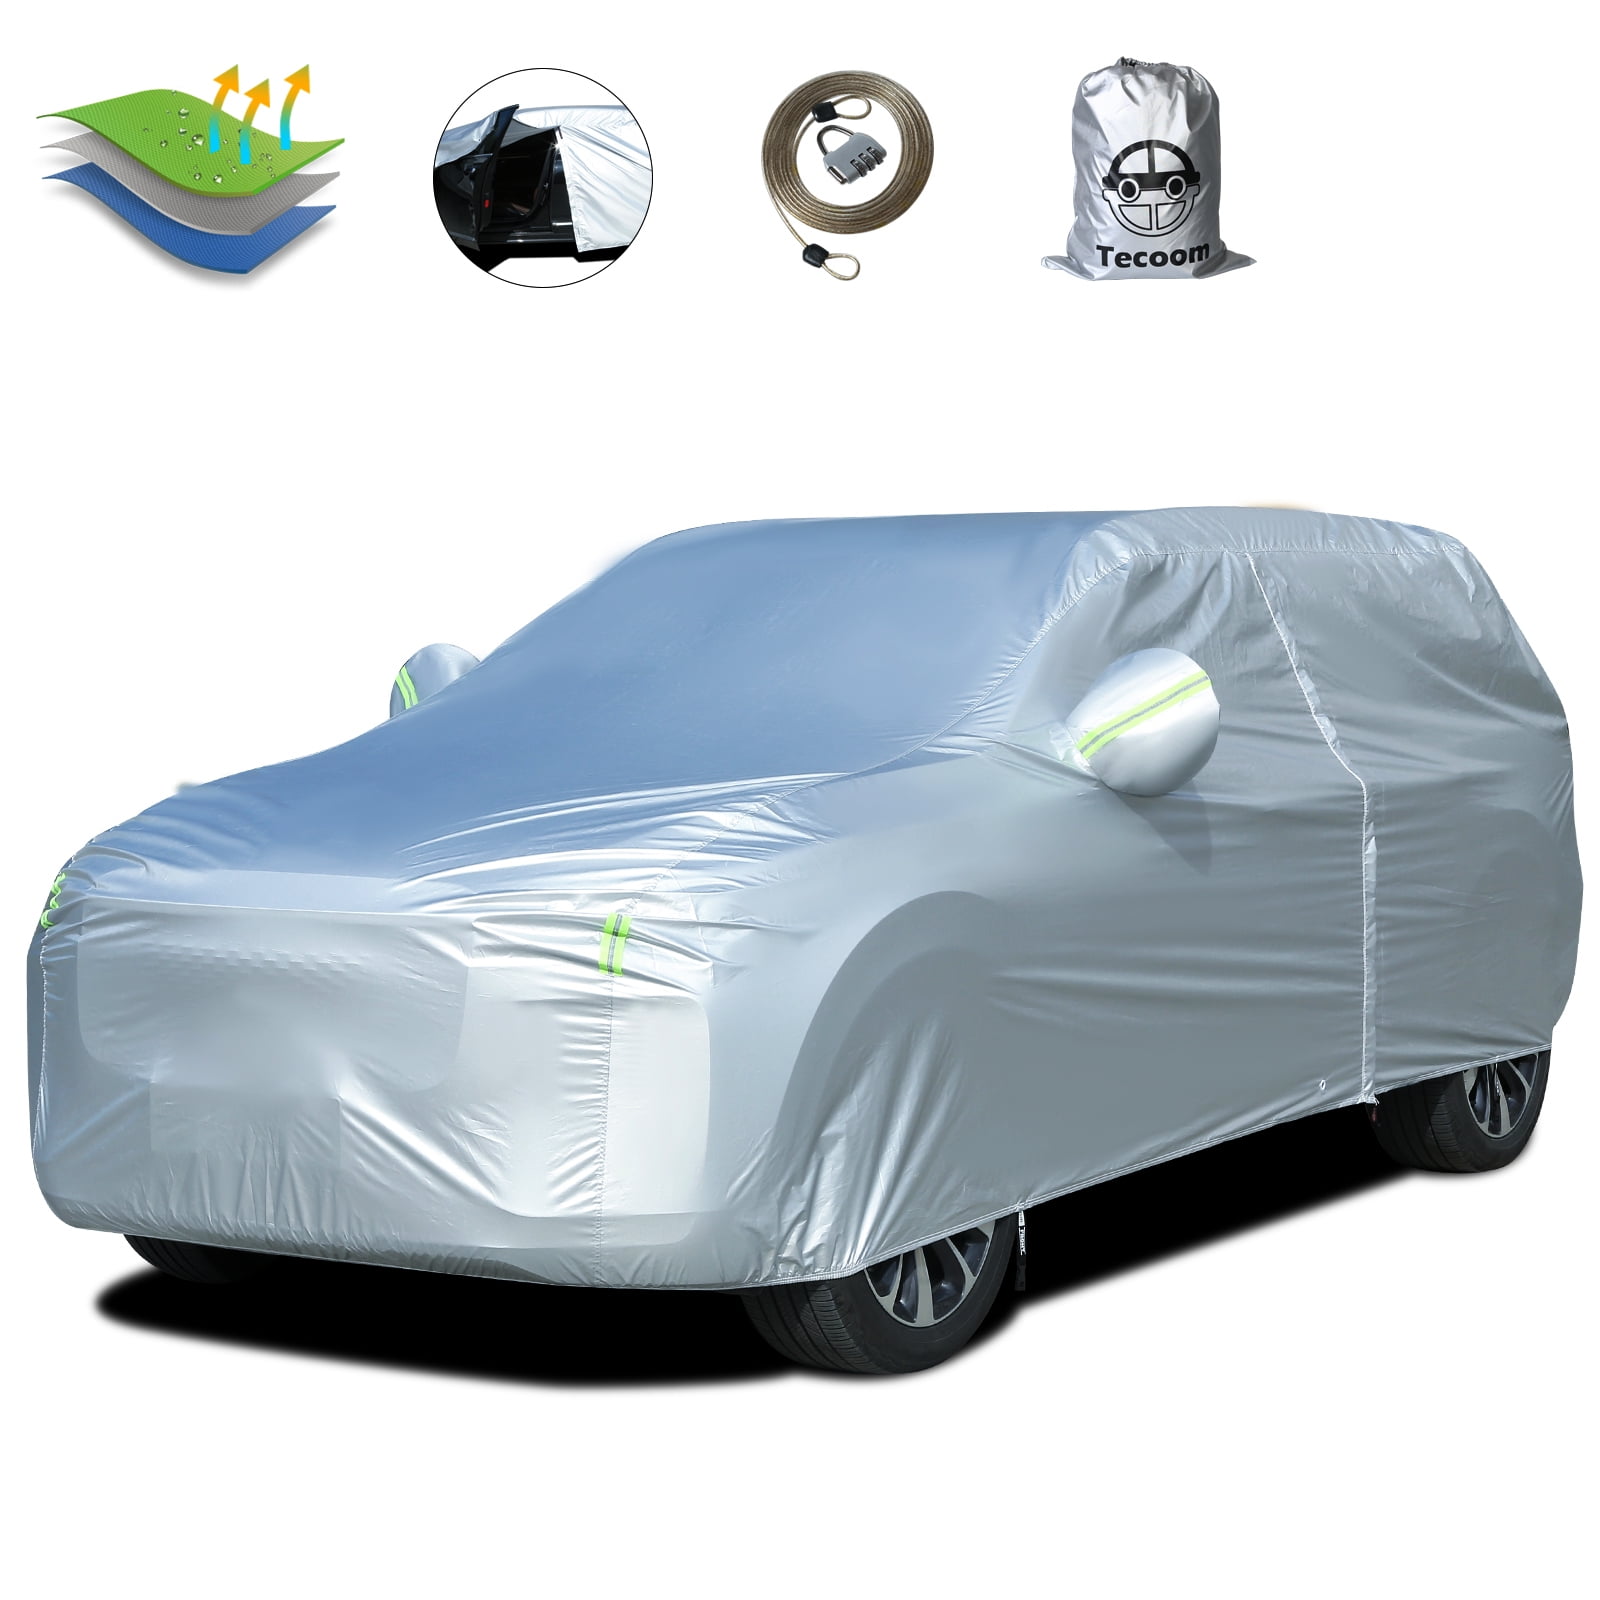 Full SUV Car Cover for Acura RDX Motor Trend Water Dirt Dust Scratch Resistant 